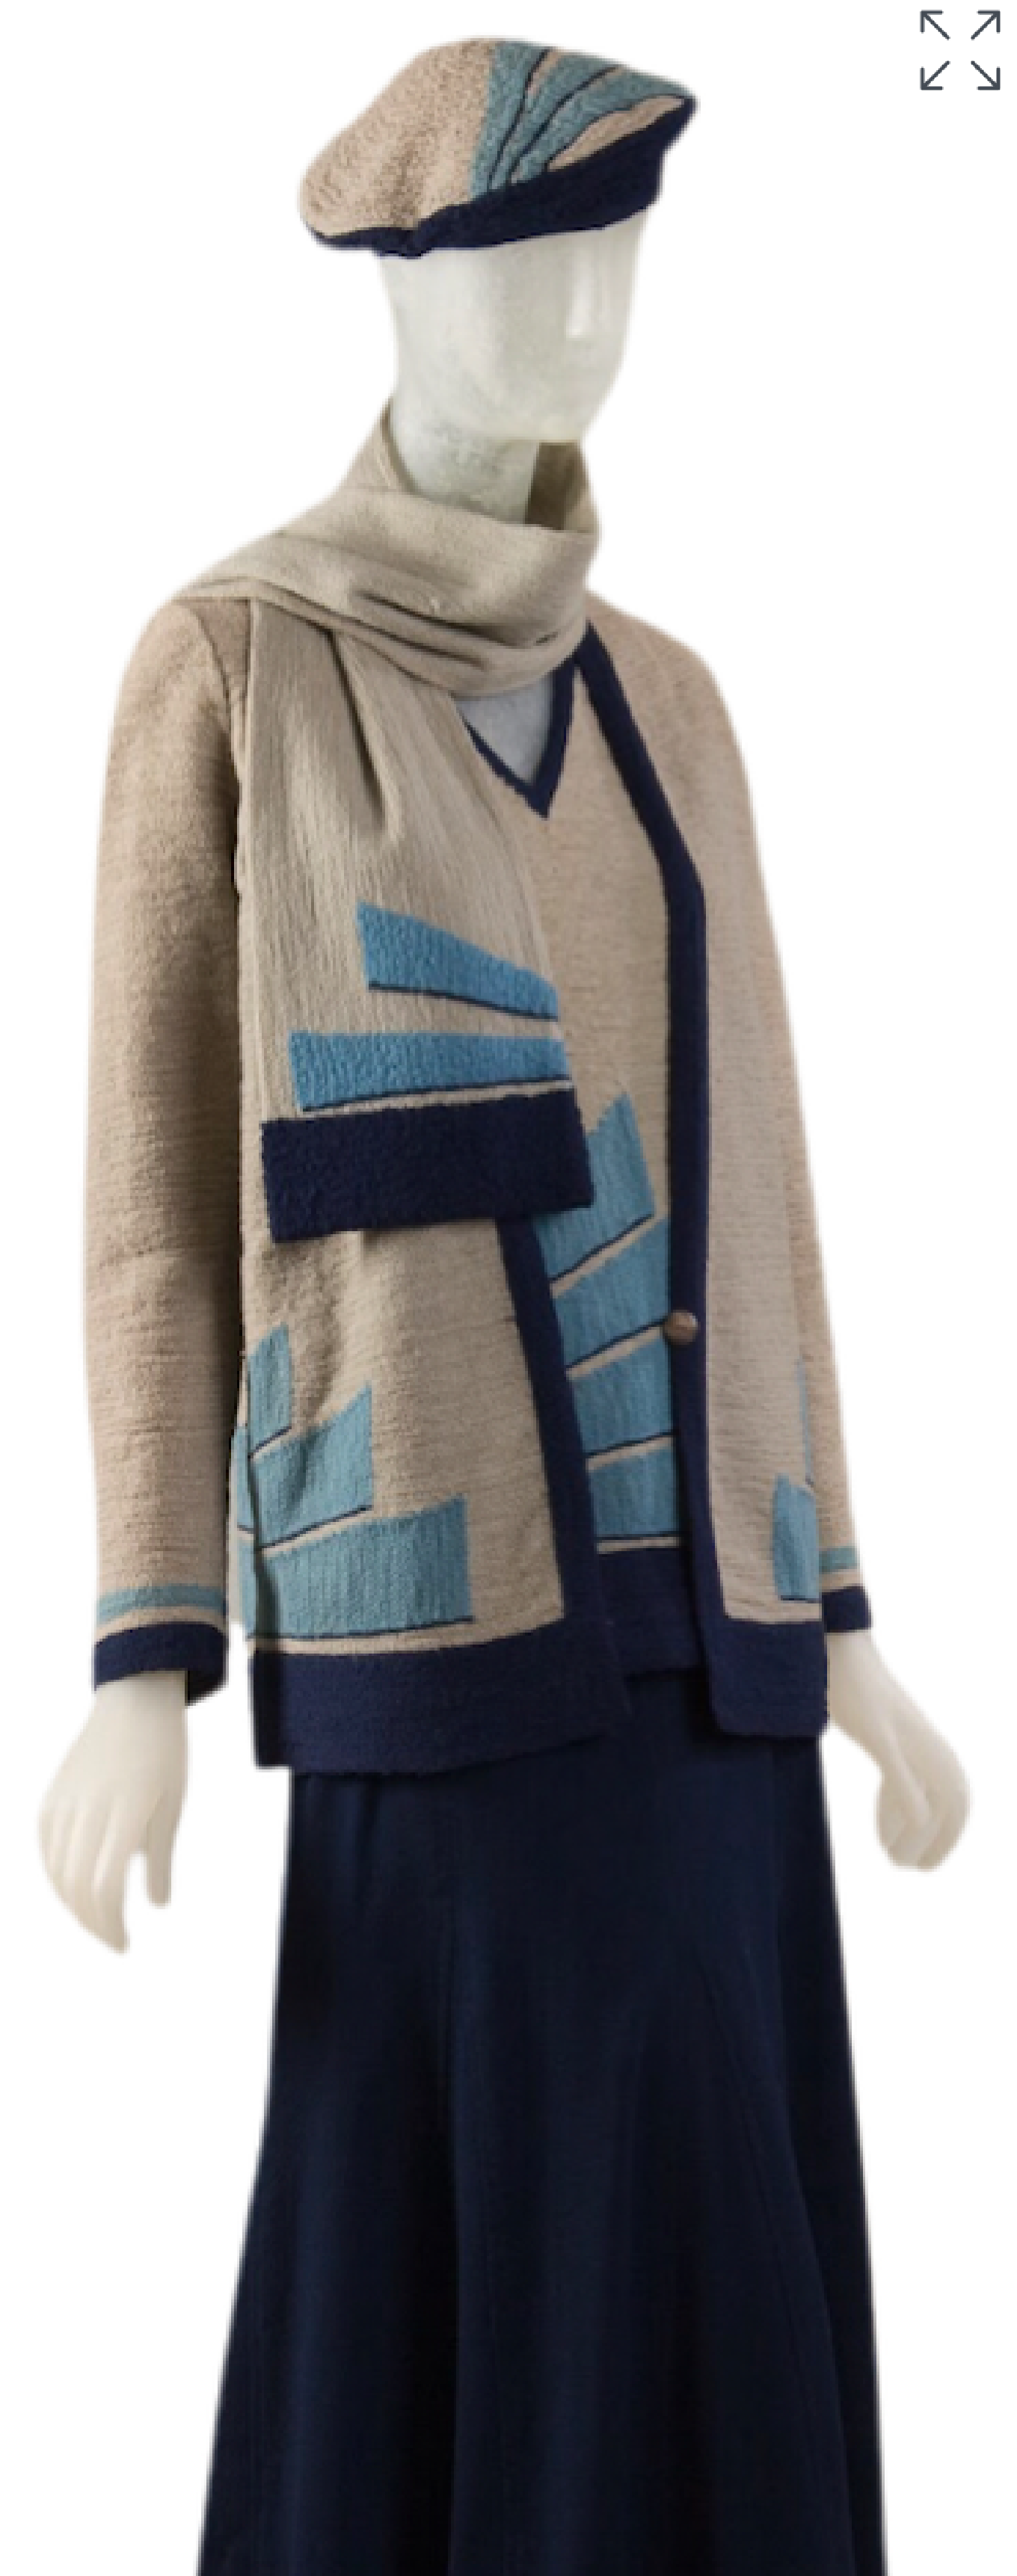 Front view of a 1929 ensemble by an unknown artist containing a hat, scarf, V neck top, and longsleeve cardigan made of the same grey wool knit fabric with a blue band at the edgs and turquoise rectangle motif. They are paired with a navy wool crepe skirt.